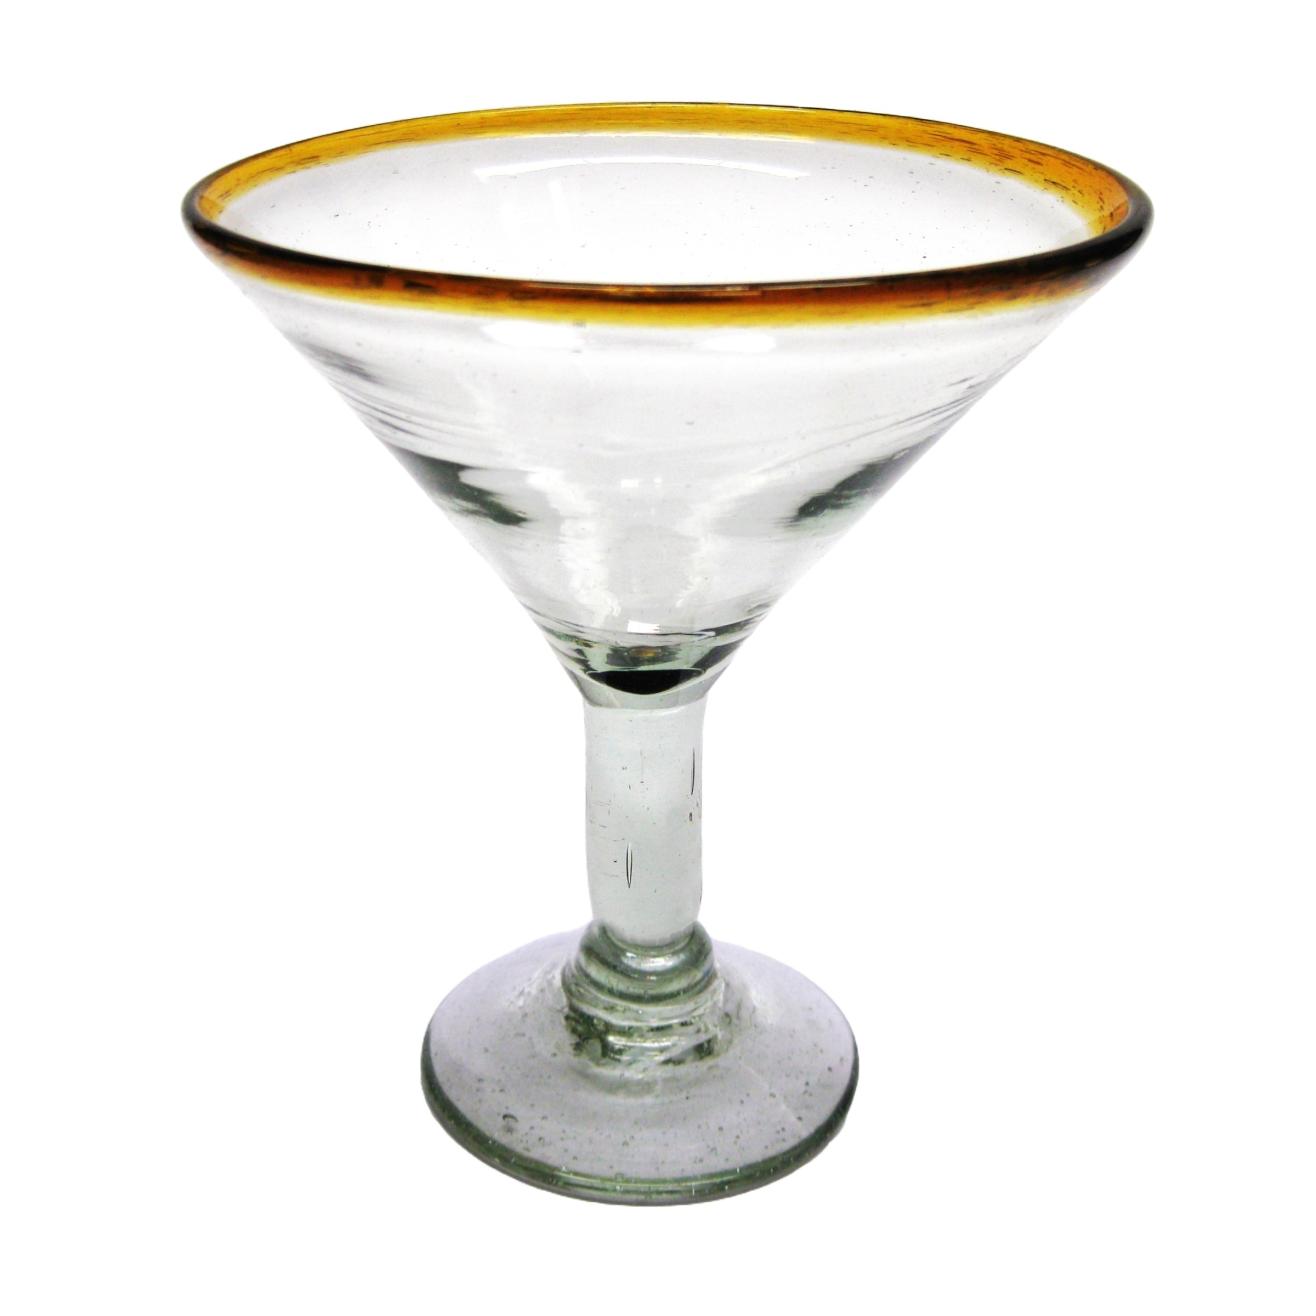 Wholesale Amber Rim Glassware / Amber Rim 10 oz Martini Glasses  / This wonderful set of martini glasses will bring a classic, mexican touch to your parties.